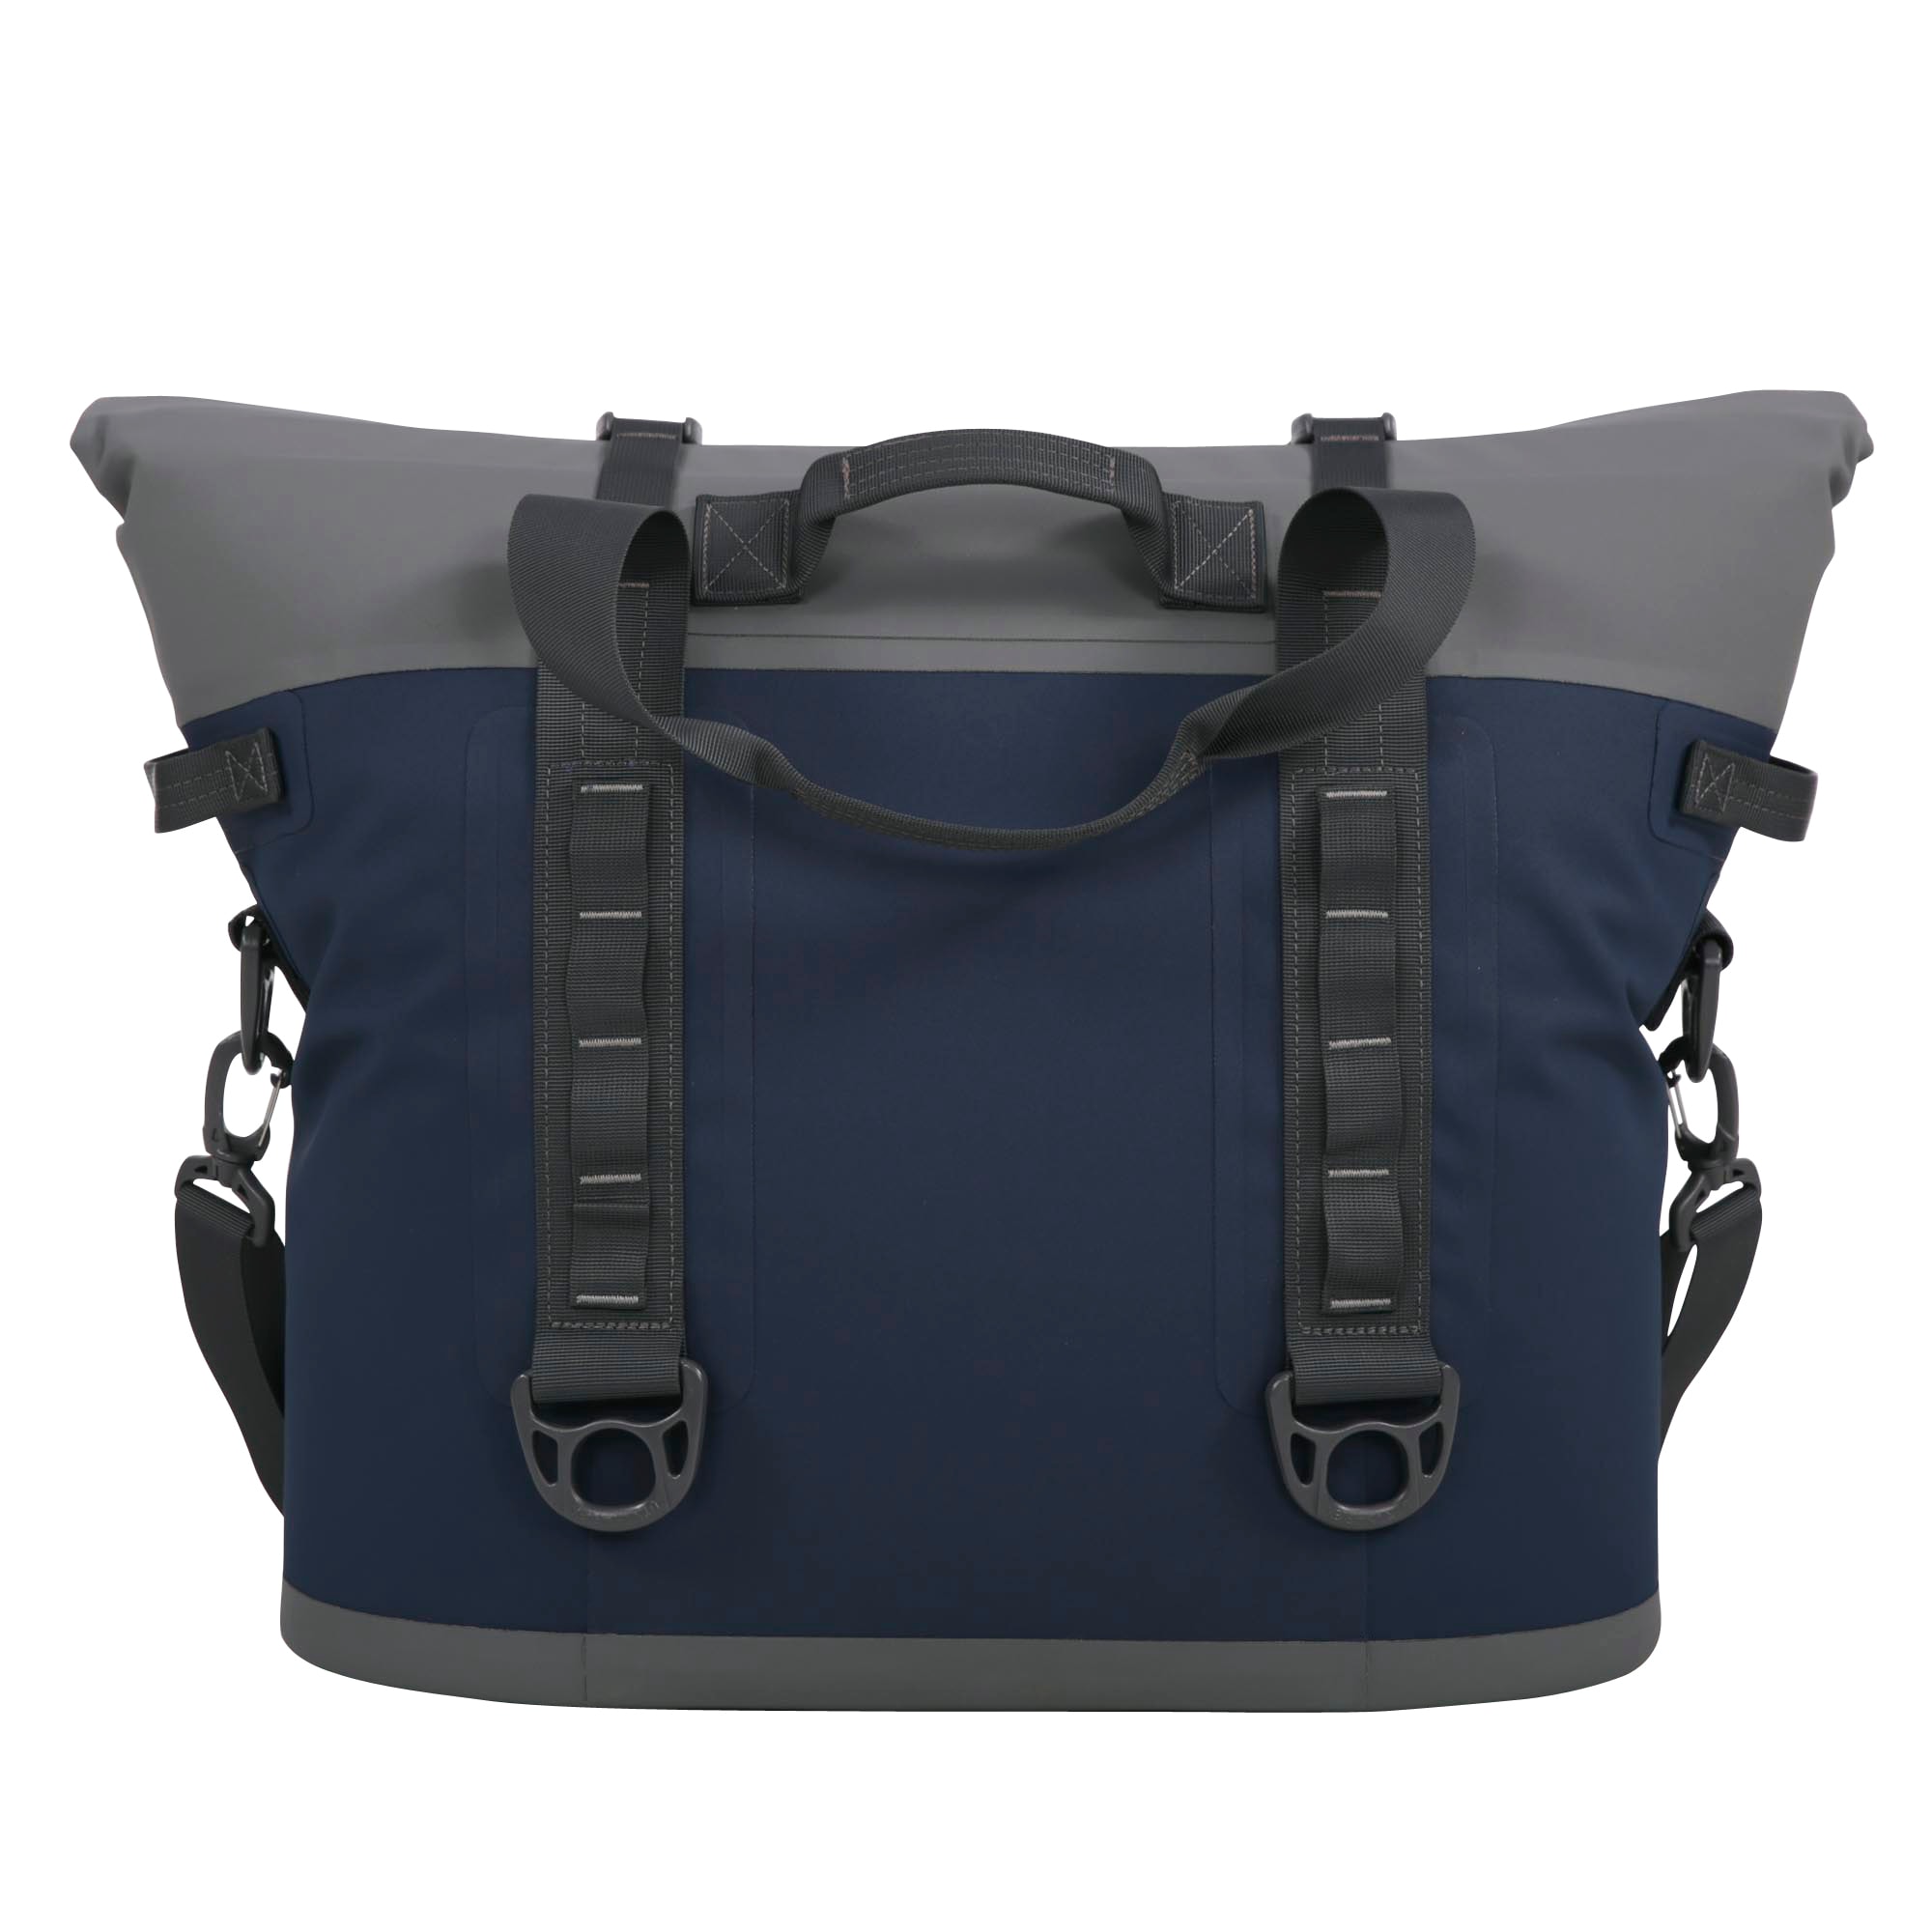 YETI Hopper M30 Insulated Bag Cooler, Navy in the Portable Coolers 